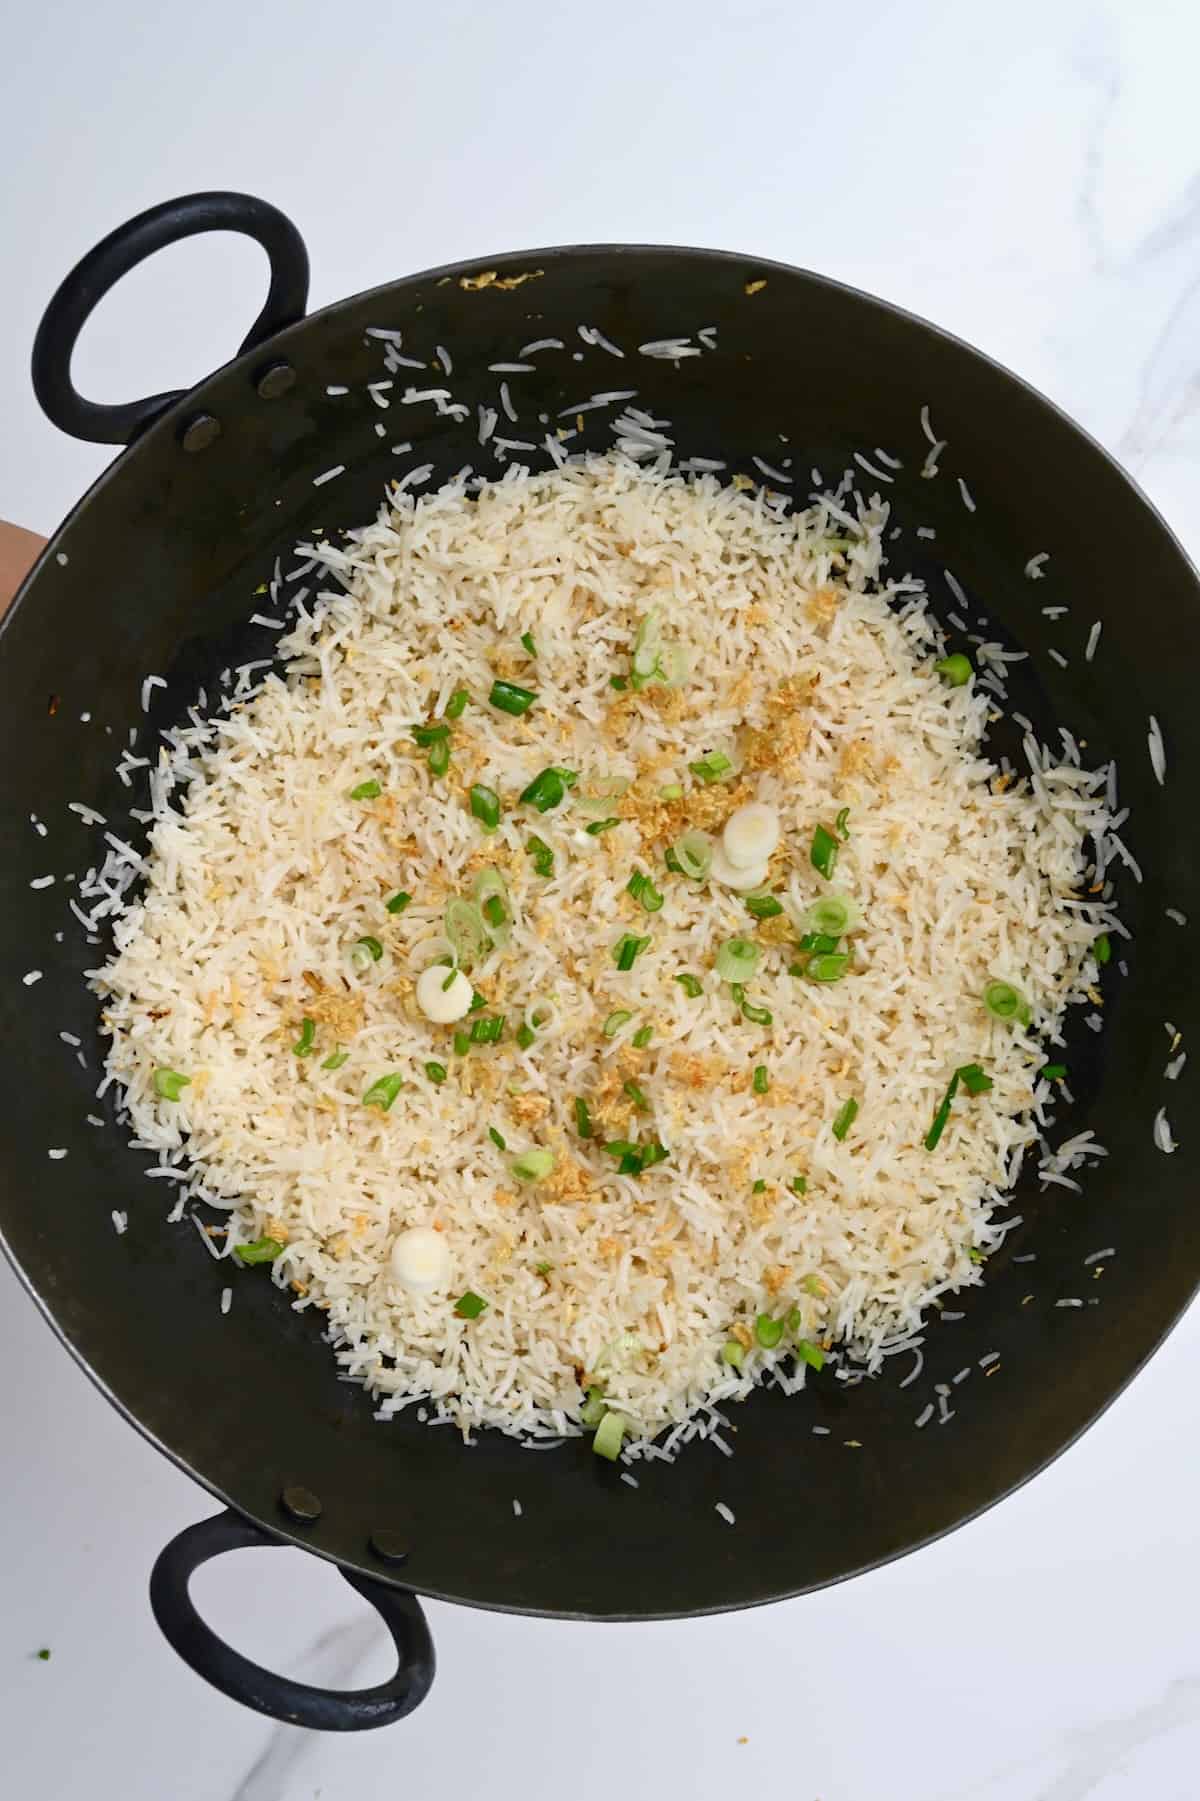 Garlic rice topped with green onion in a pan